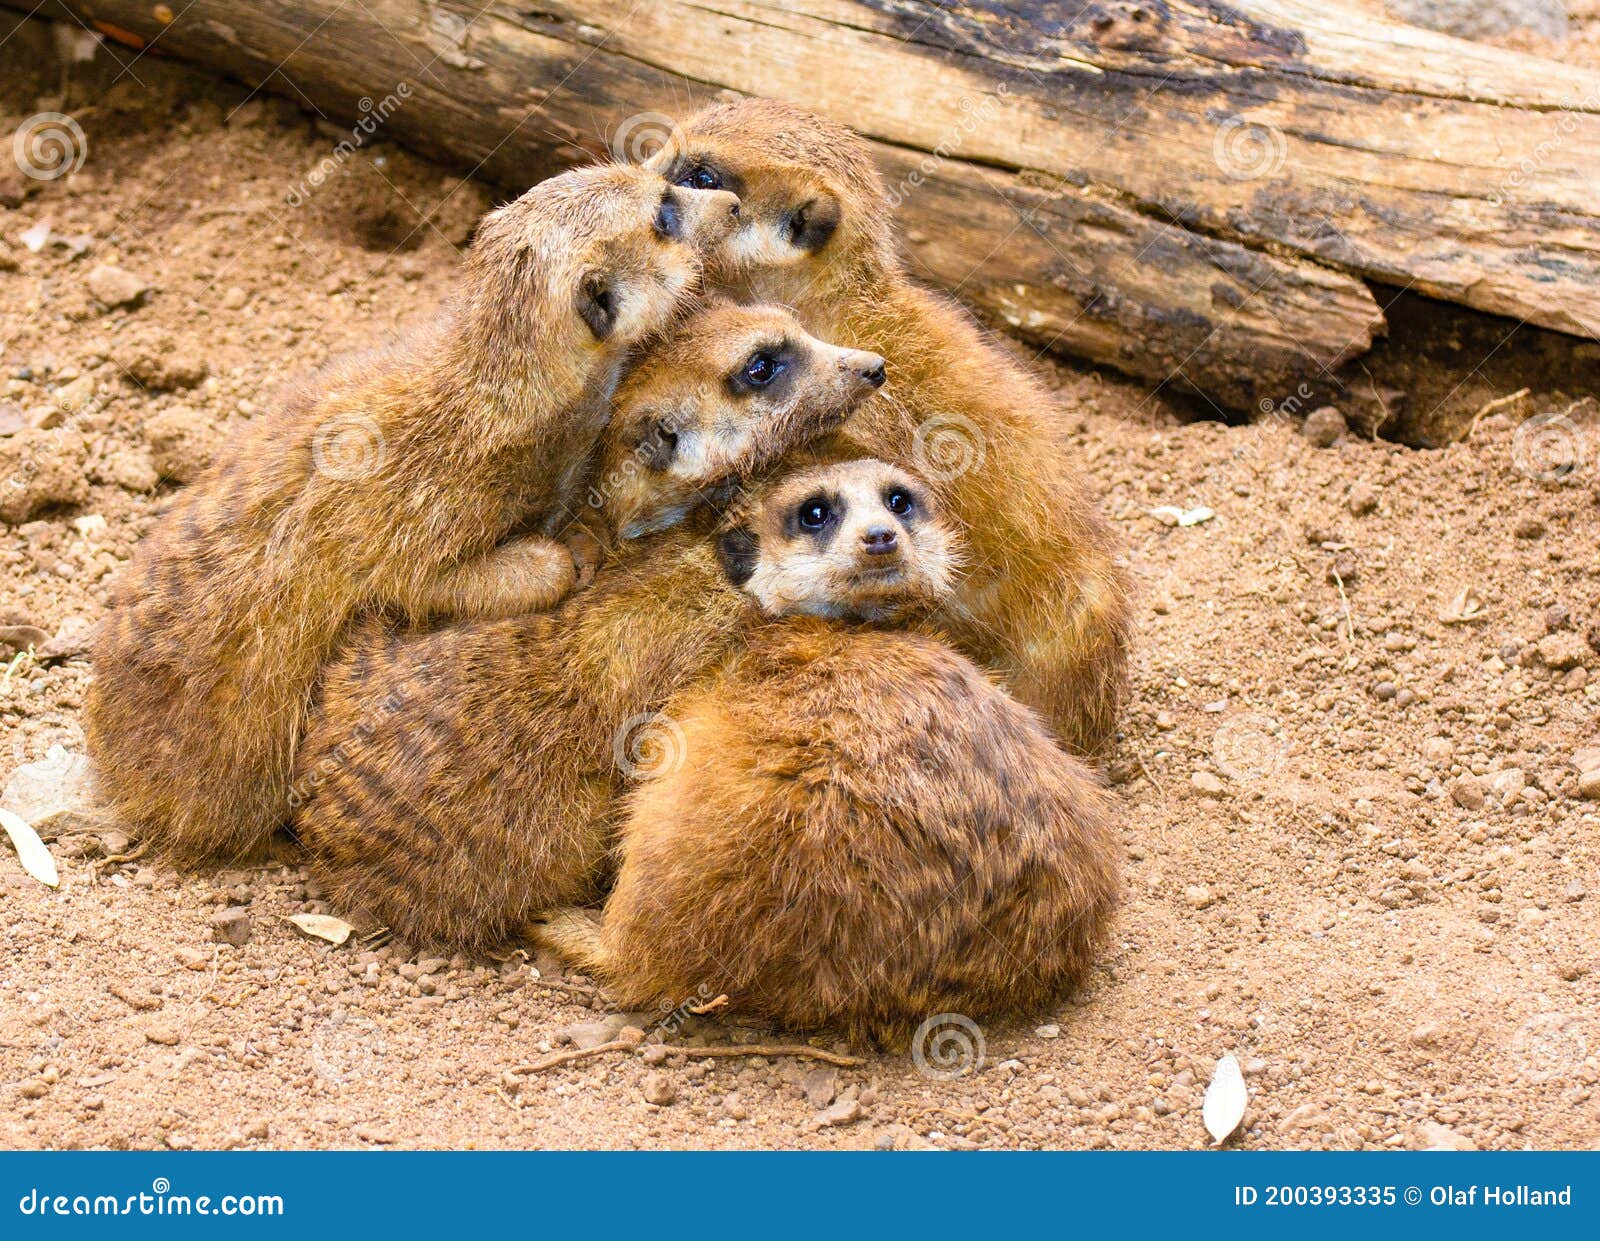 Cozy Meerkats Group Relaxing, Cuddling and Laying in a Bunch Close Together  Made in South Africa Stock Image - Image of beautiful, love: 200393335